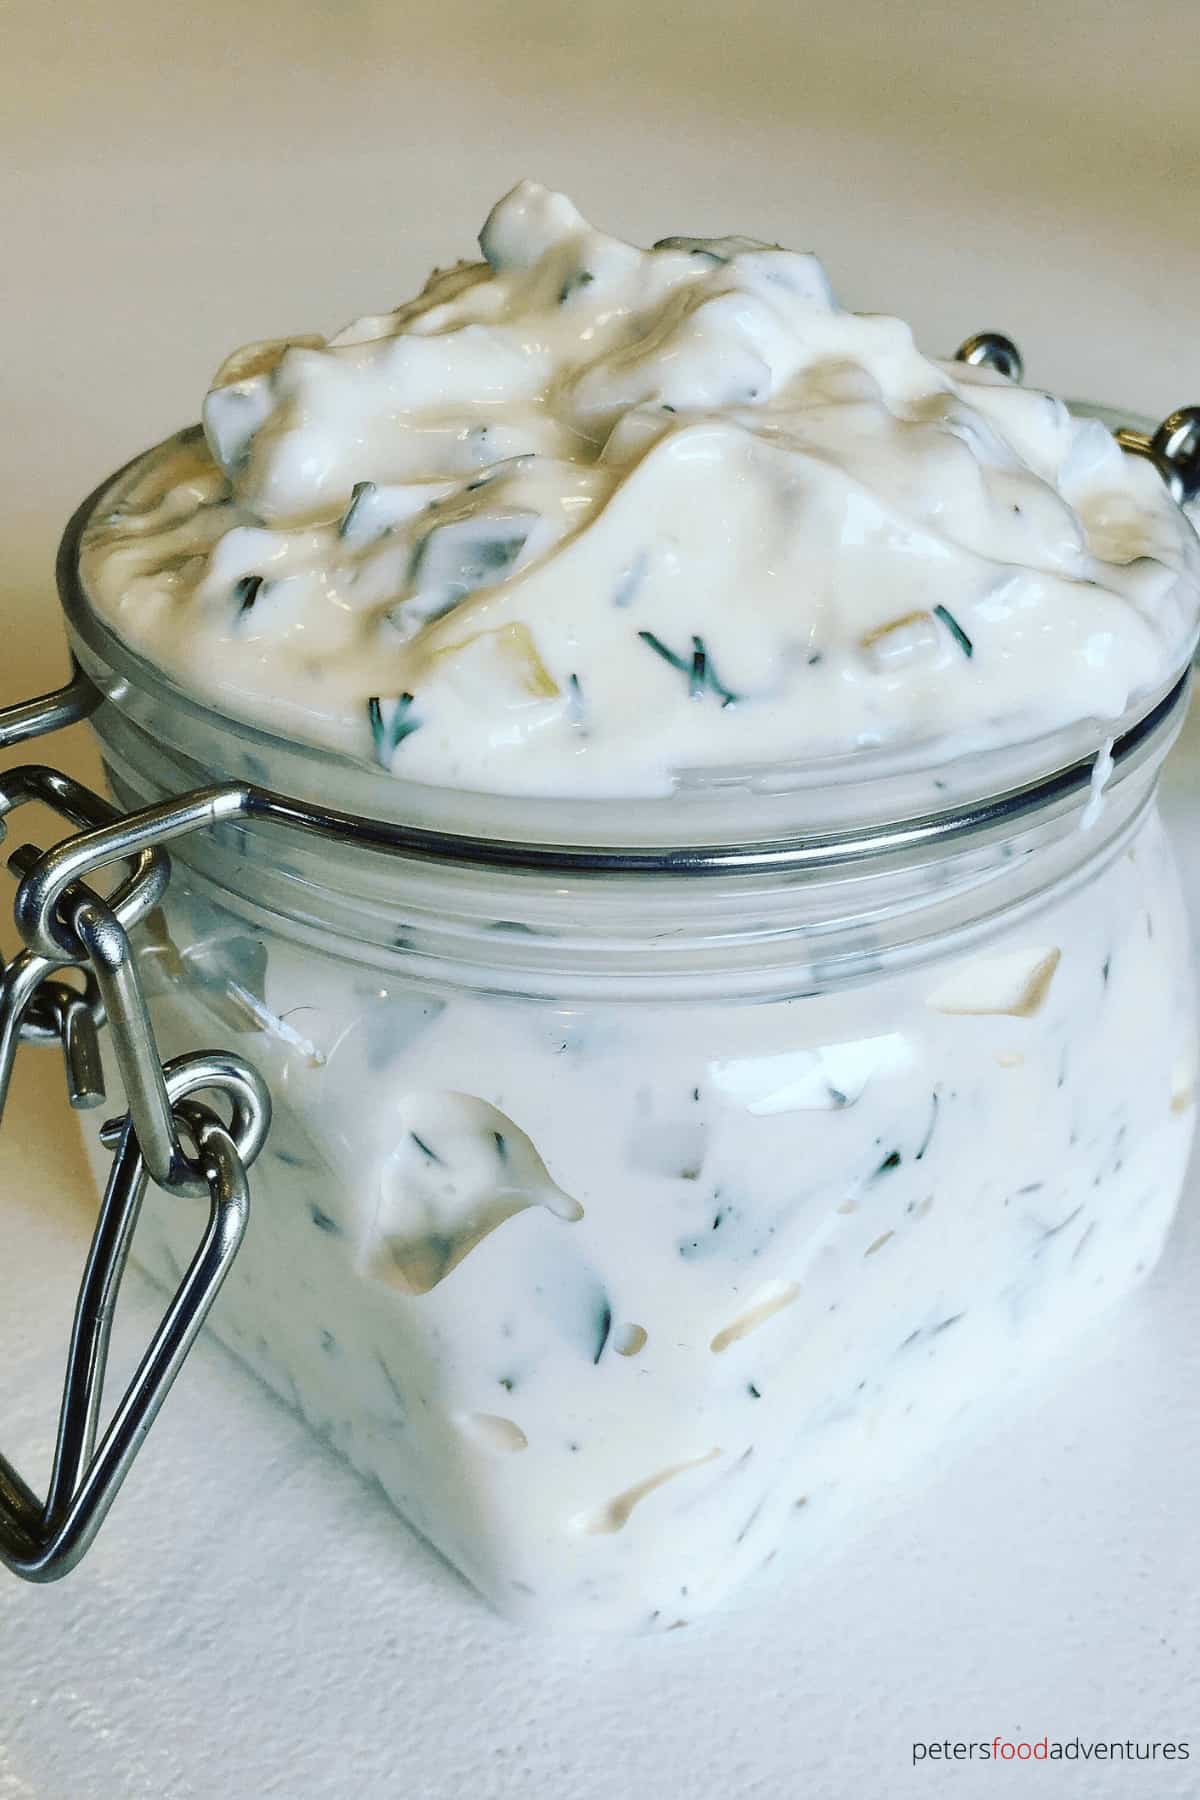 Quick and easy homemade Tartar Sauce, tastier than store bought! Made with dill pickles and mayo, and no added sugar, perfect for fish fingers or fish and chips, a dip you won't be able to stop eating! Homemade Tartar Sauce Recipe